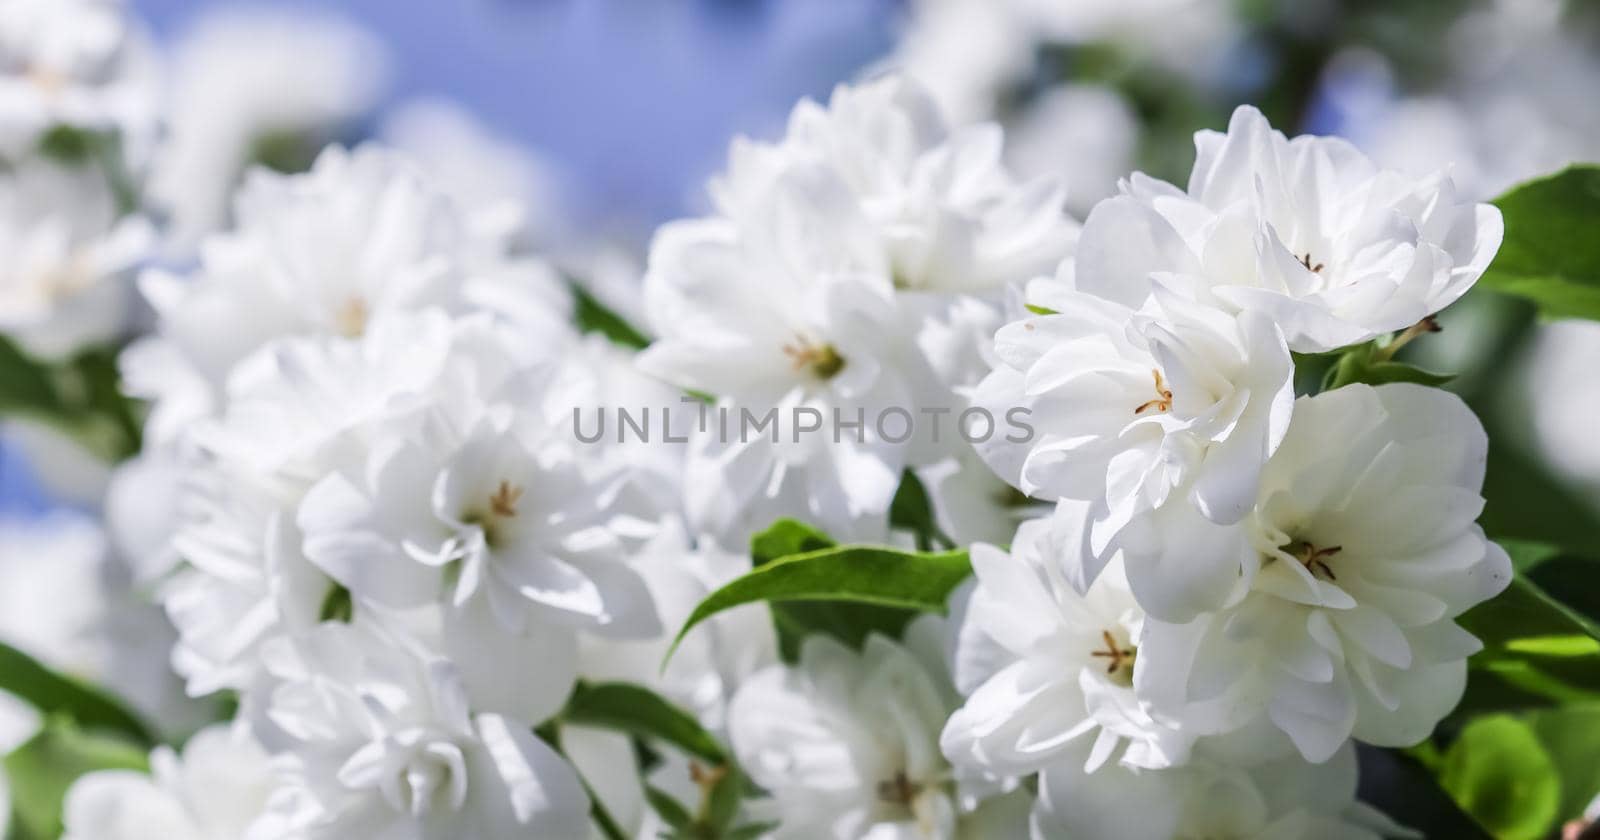 White terry jasmine flowers in the garden against blue sky. Floral background